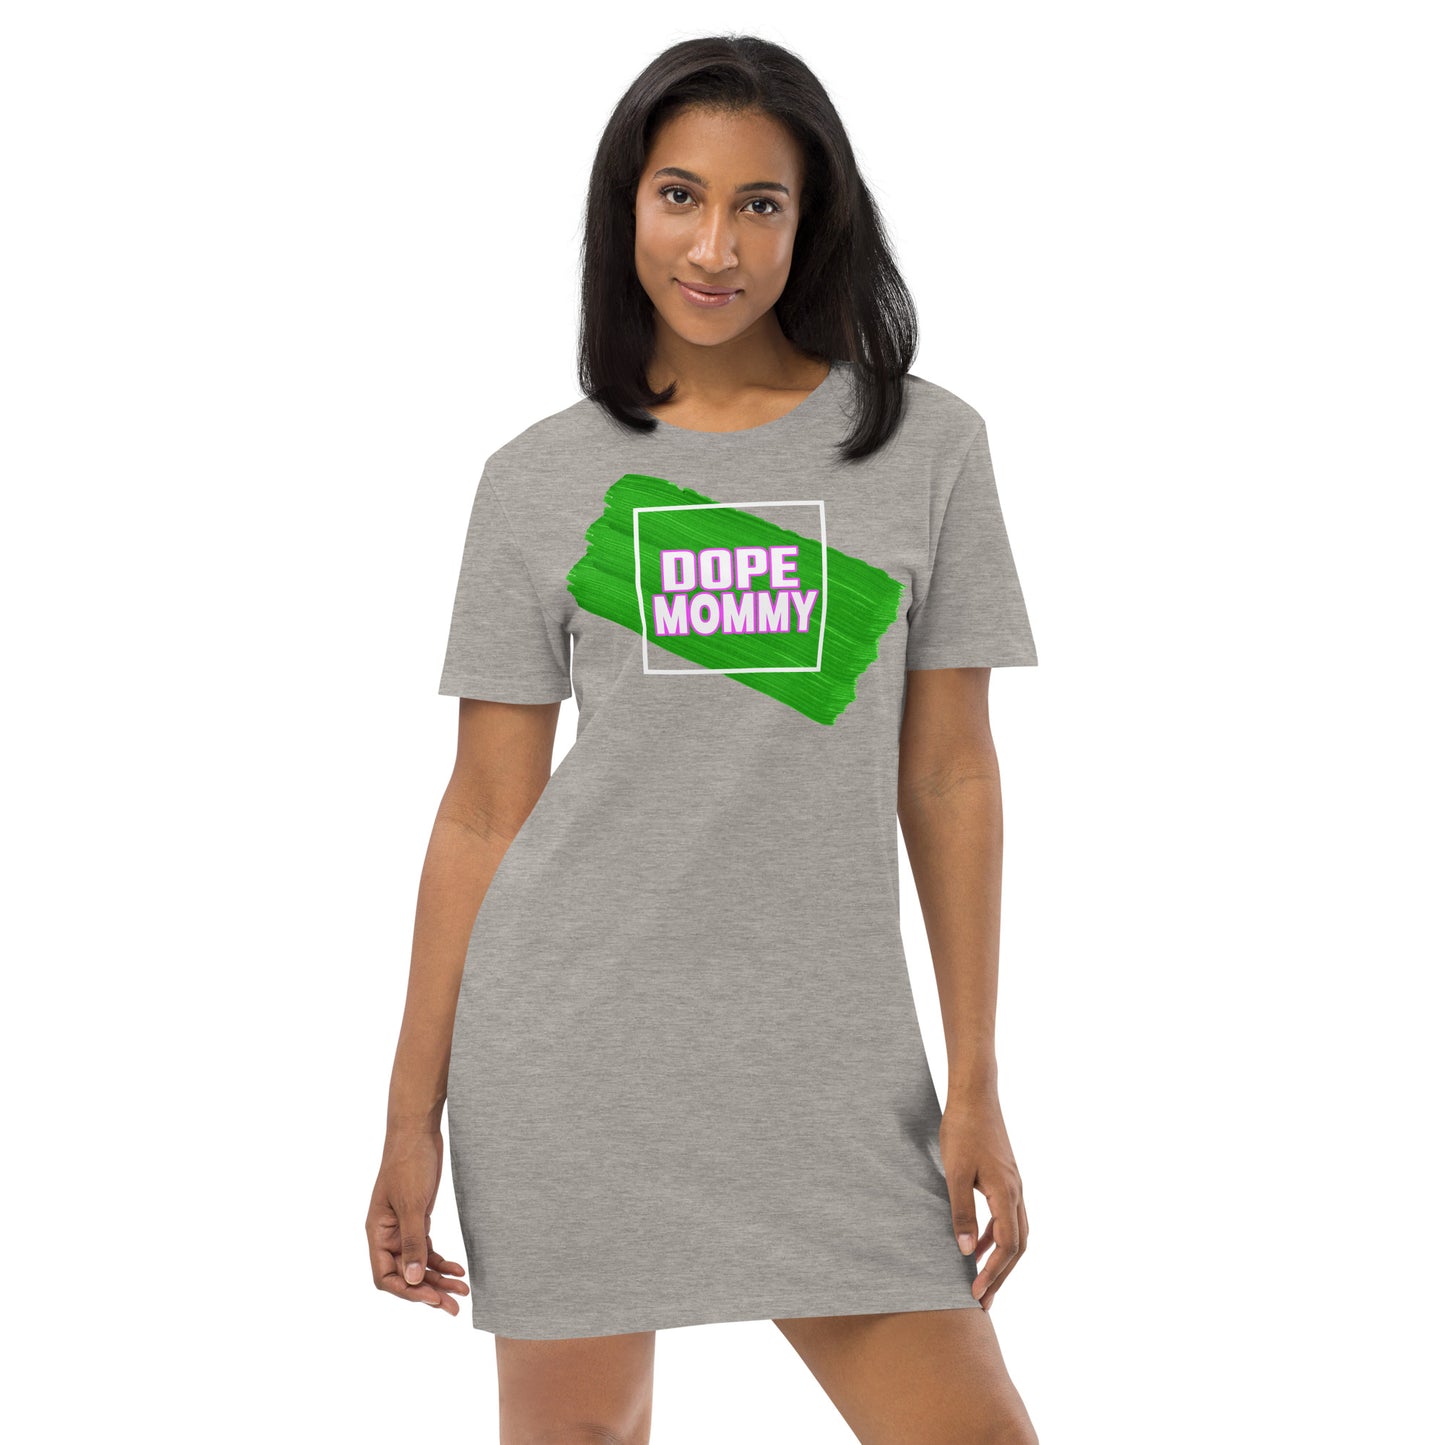 Adult "Dope Mommy" T-shirt Dress